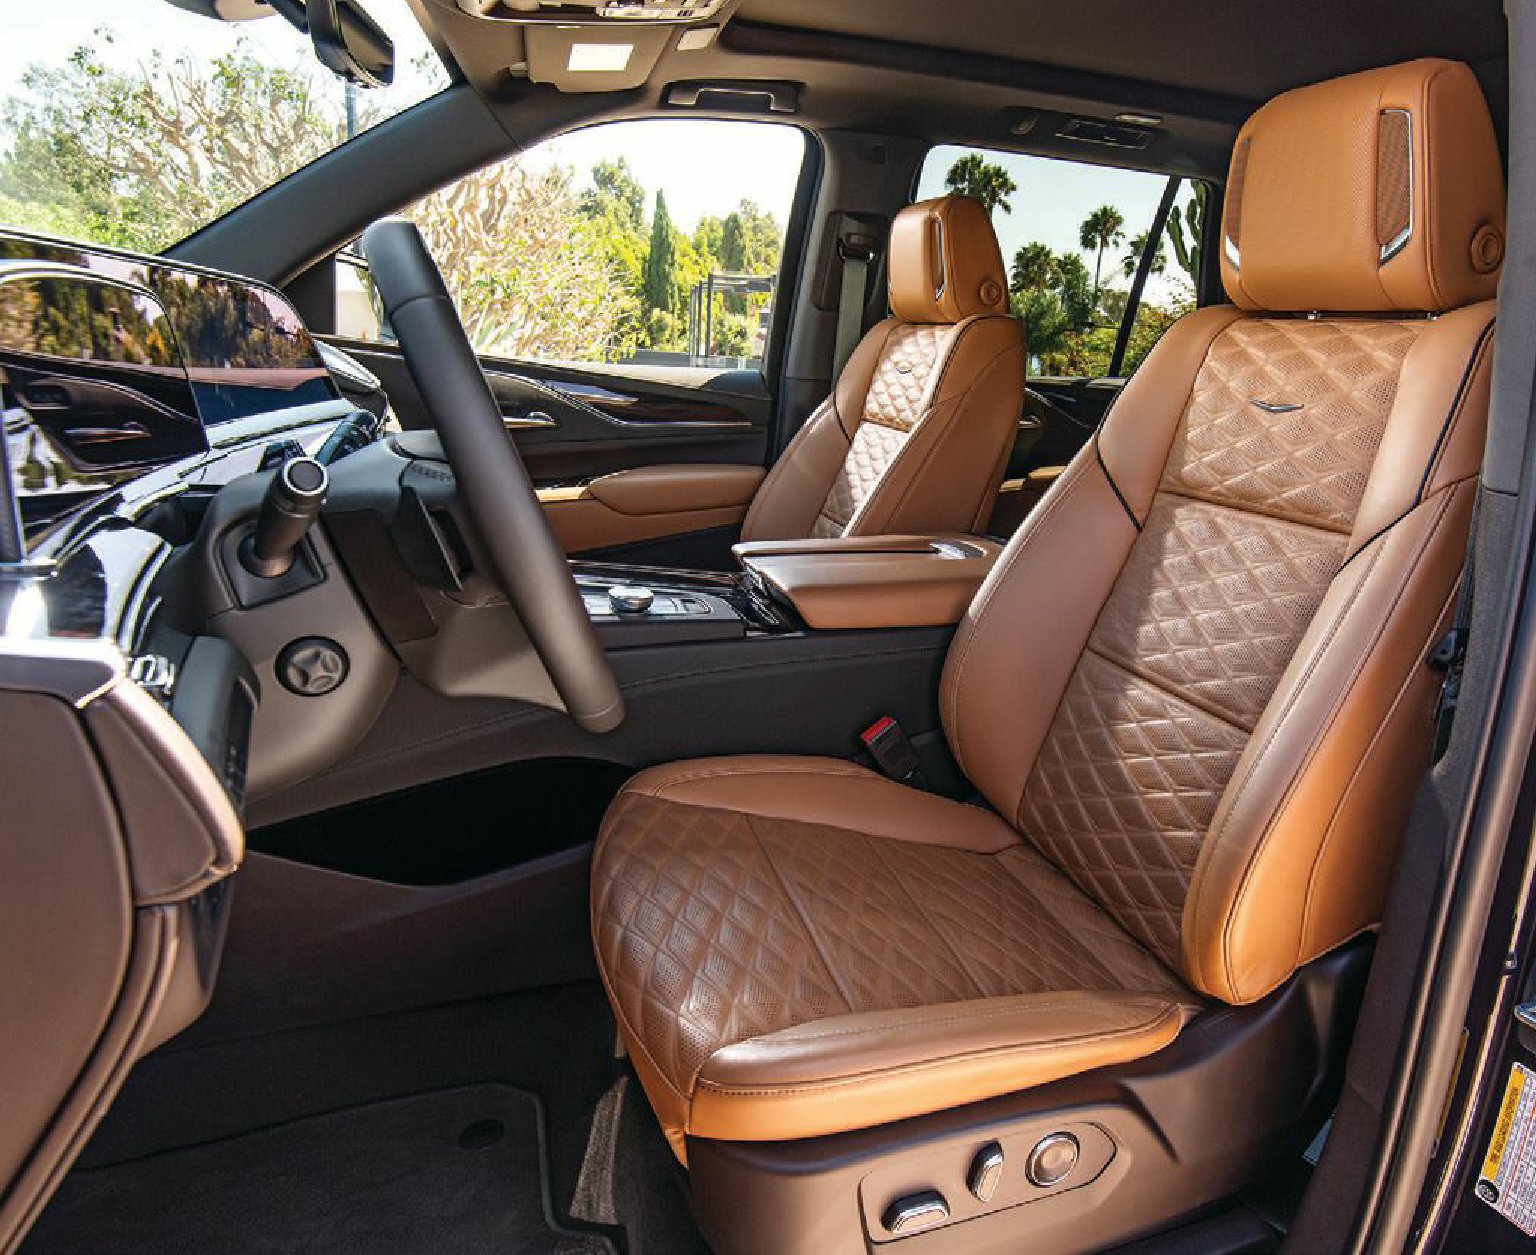 Custom seat perforation and quilting patterns are among the Escalade’s luxe interior options PHOTO COURTESY OF CADILLAC